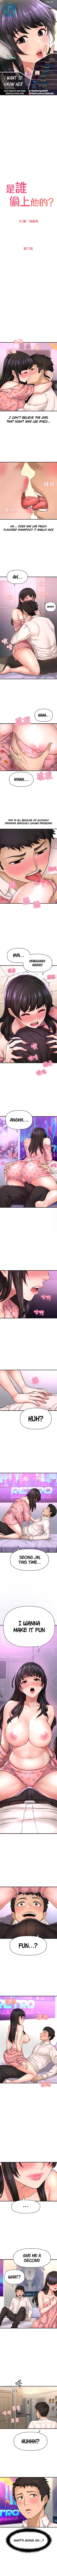 I Want To Know Her Manga Read I Want to Know Her Online [Free Chapters] - Webtoonscan.com